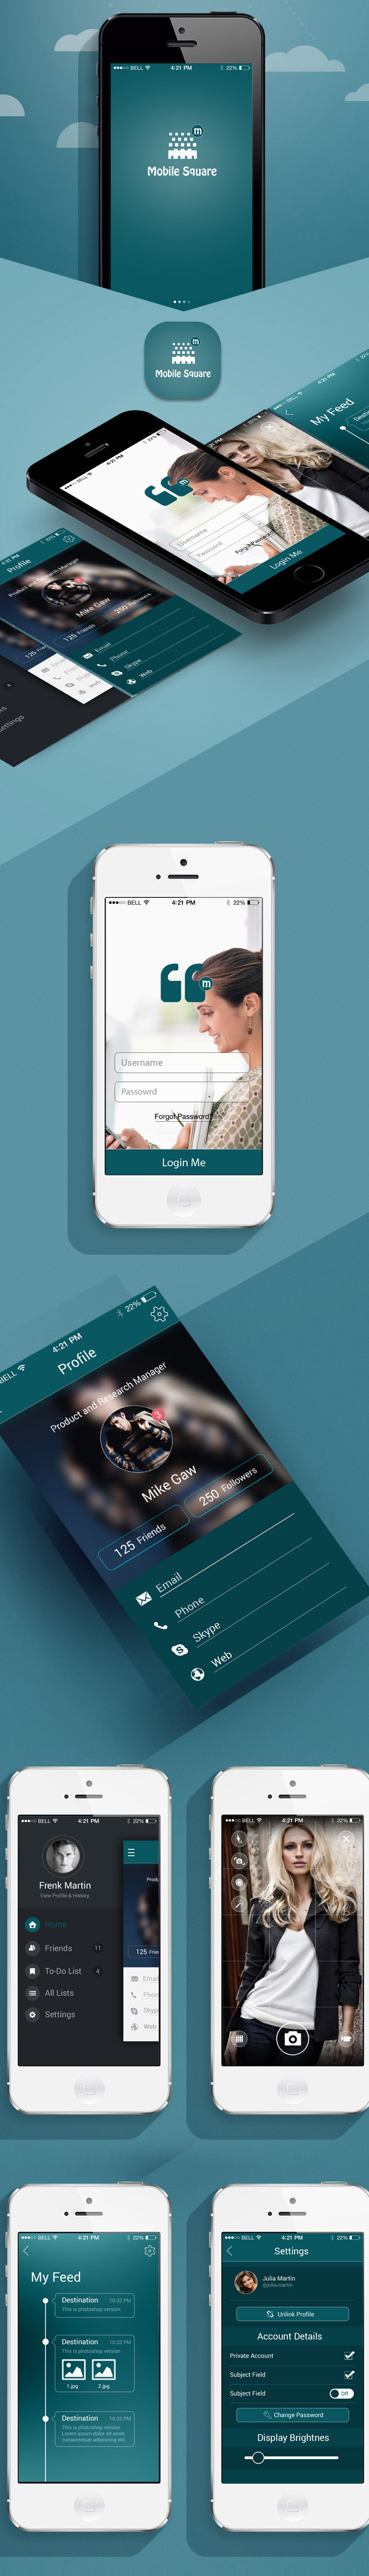 Mobile app UI app iphone android application ios7 iPad psd